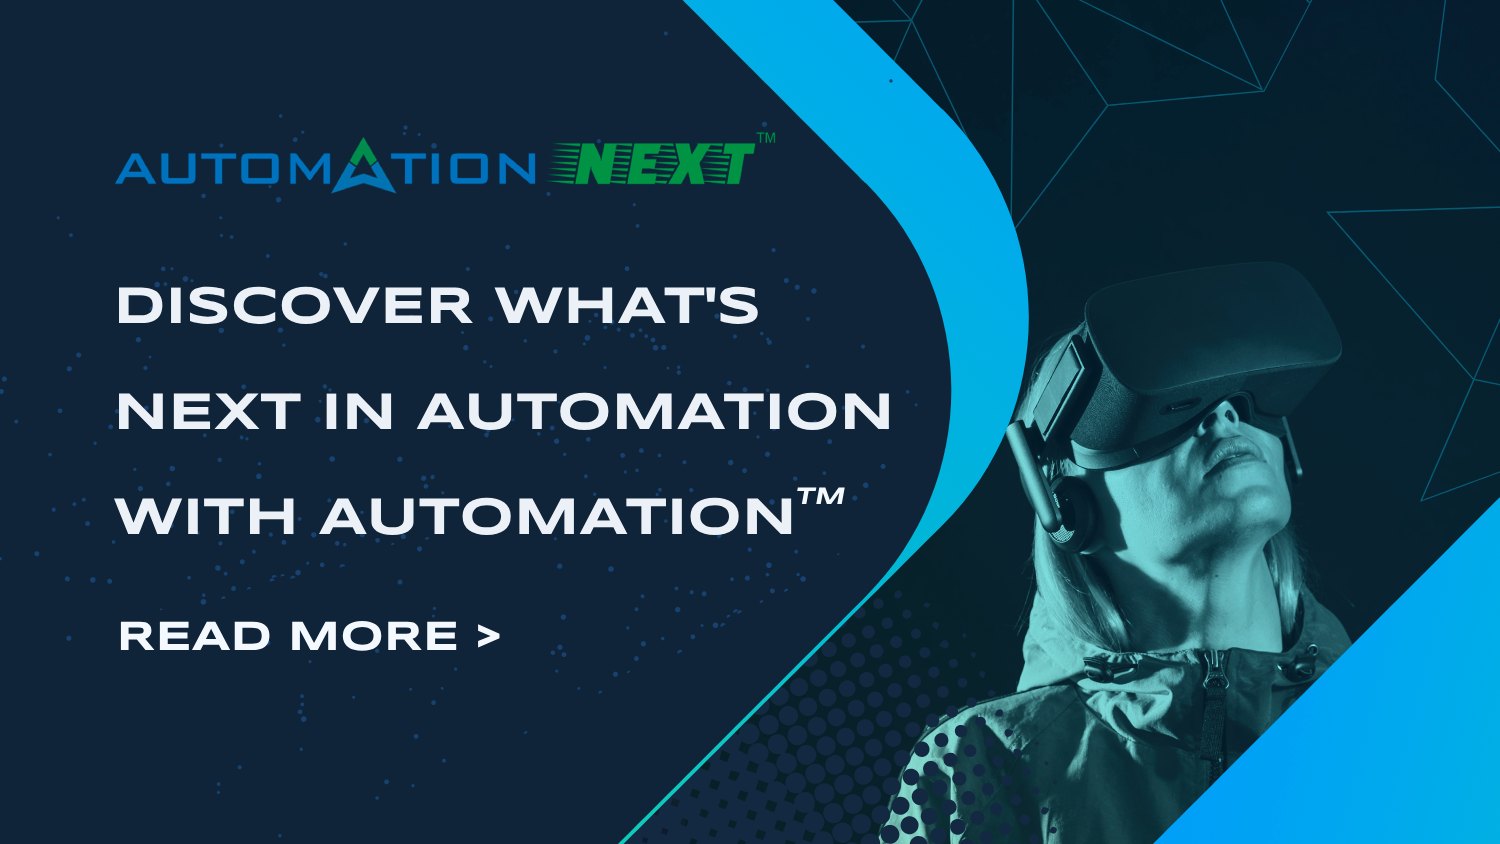 Discover what’s next in Automation with Automation NextTM